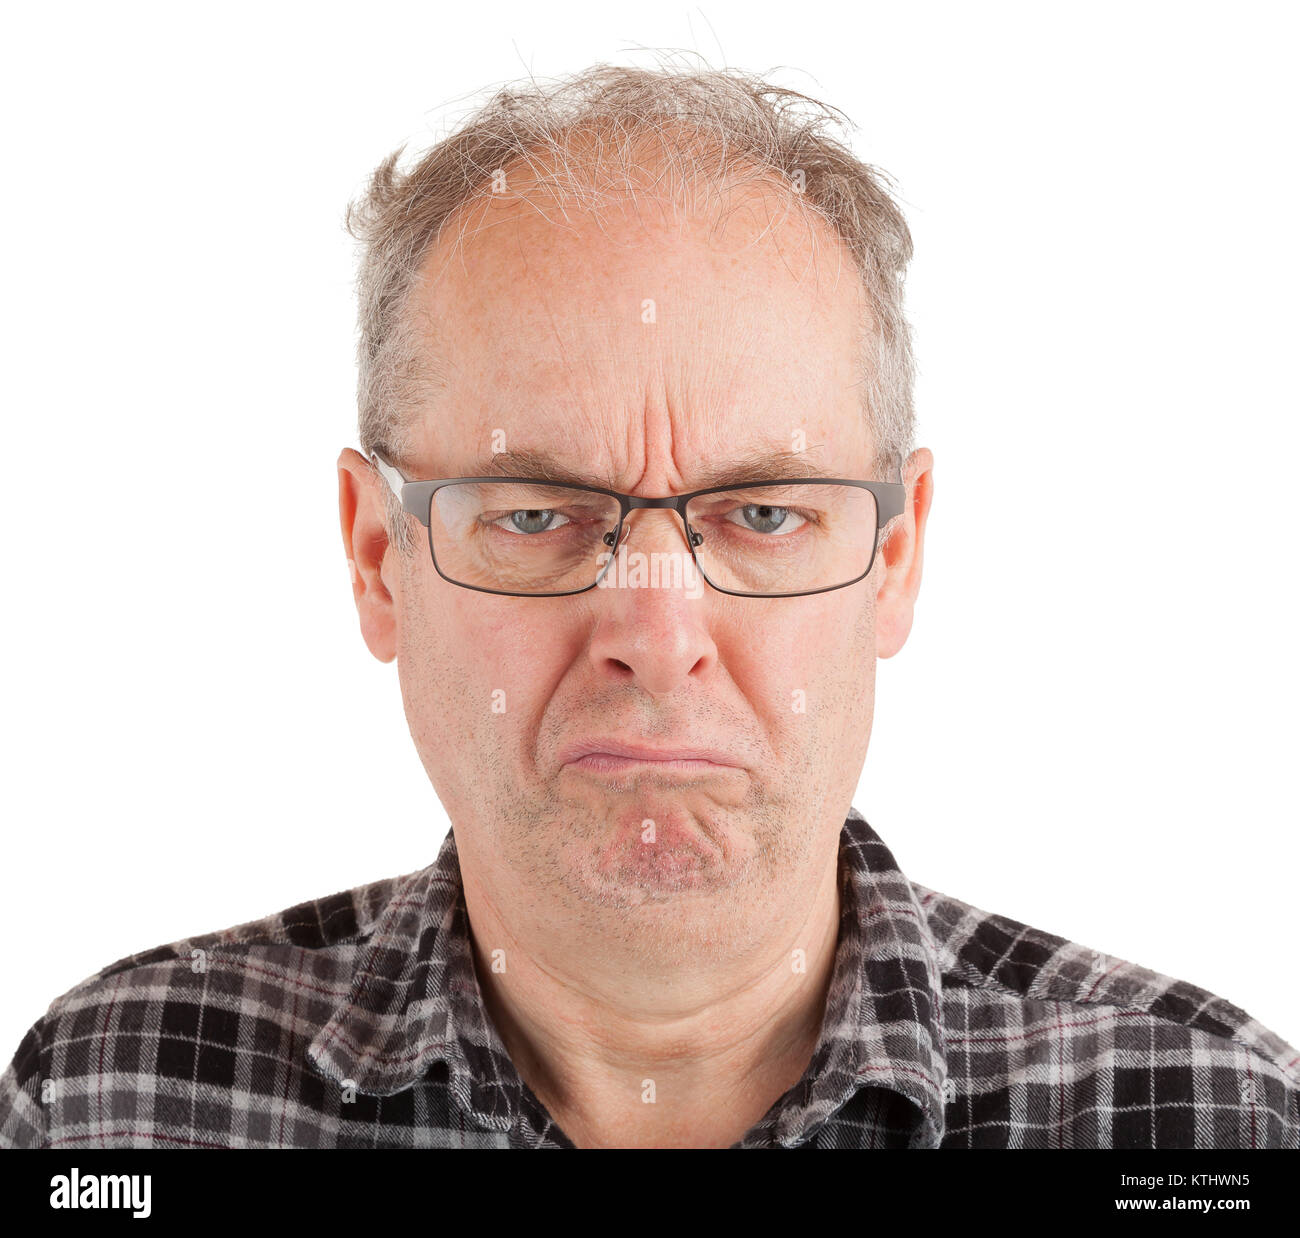 This is a portrait of a grumpy middle aged man. Stock Photo